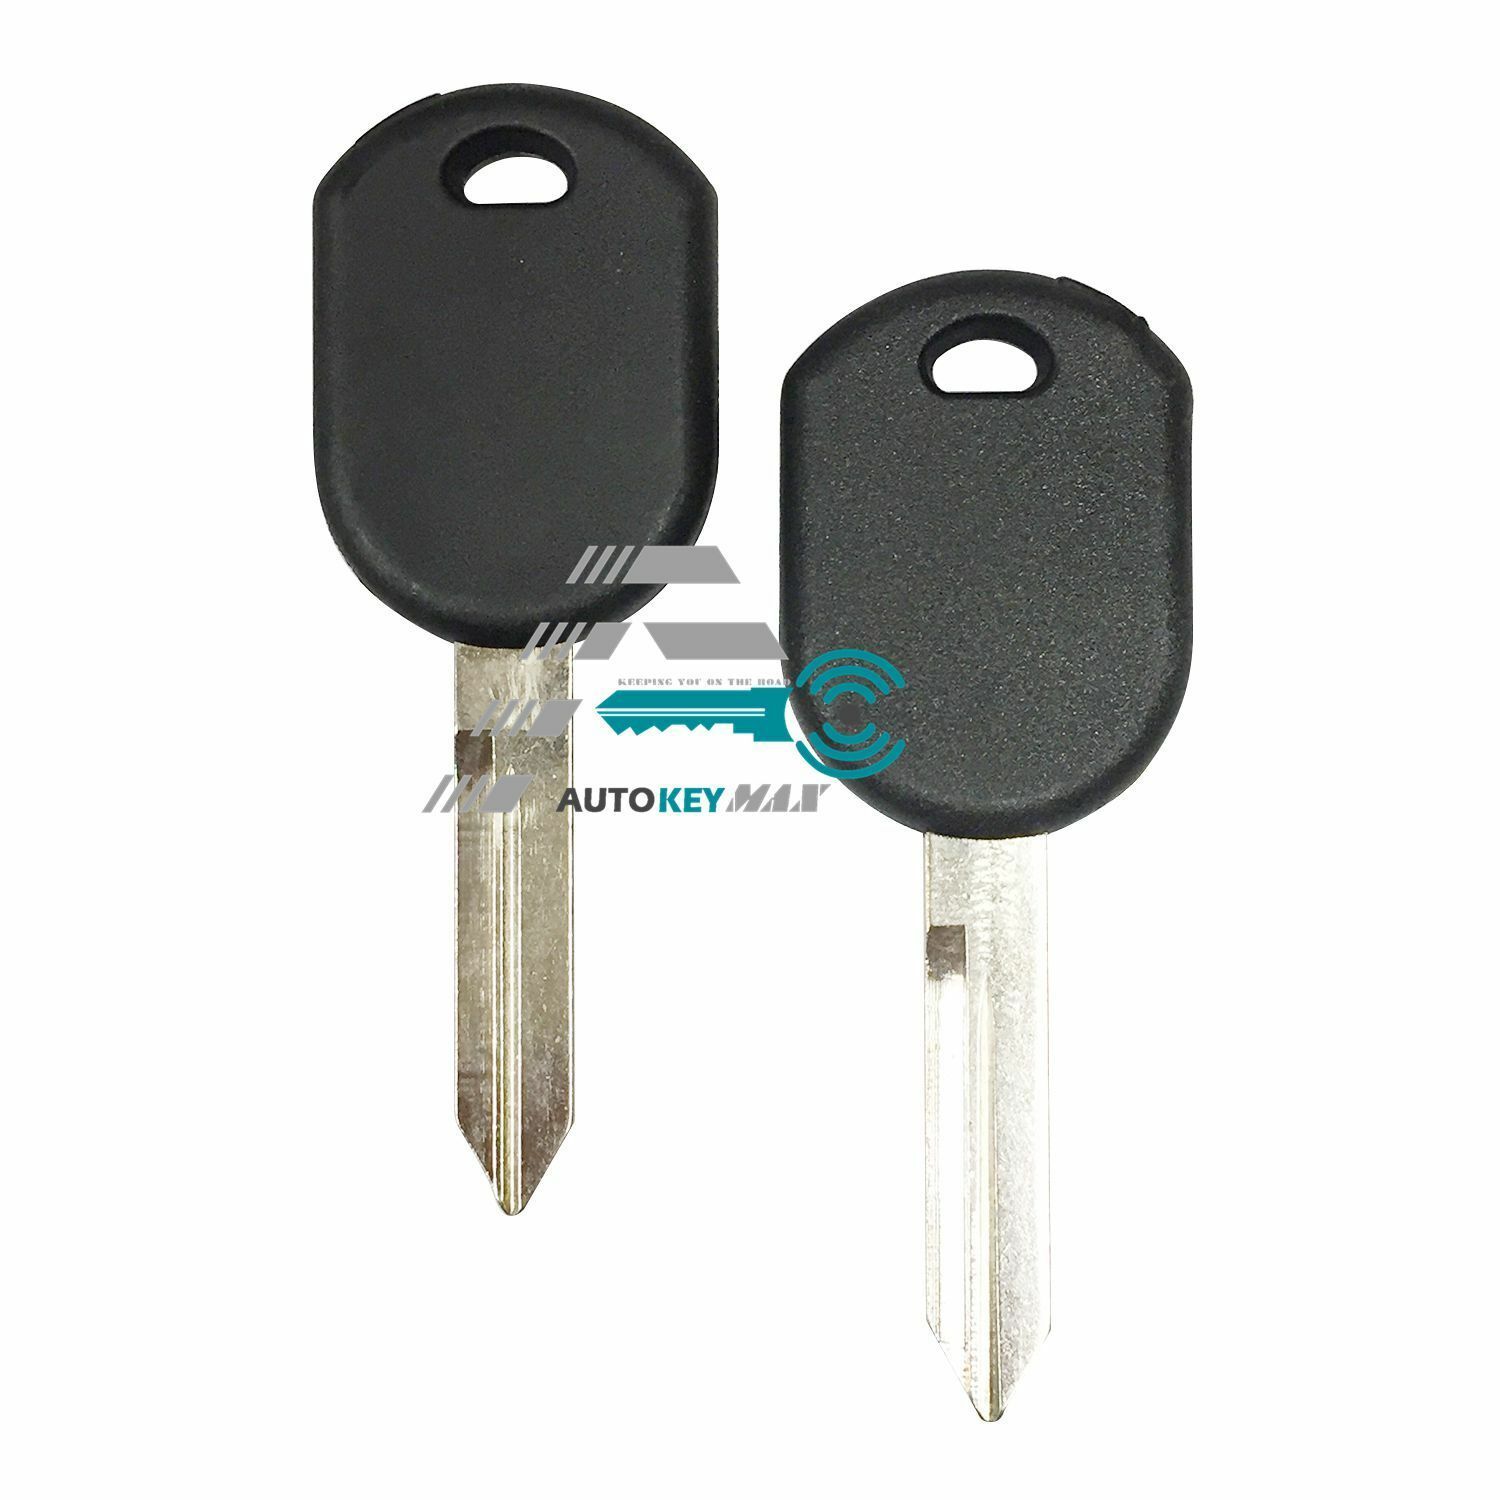 2 New Replacement Uncut Transponder chip Key For Ford Fusion Ranger Taurus